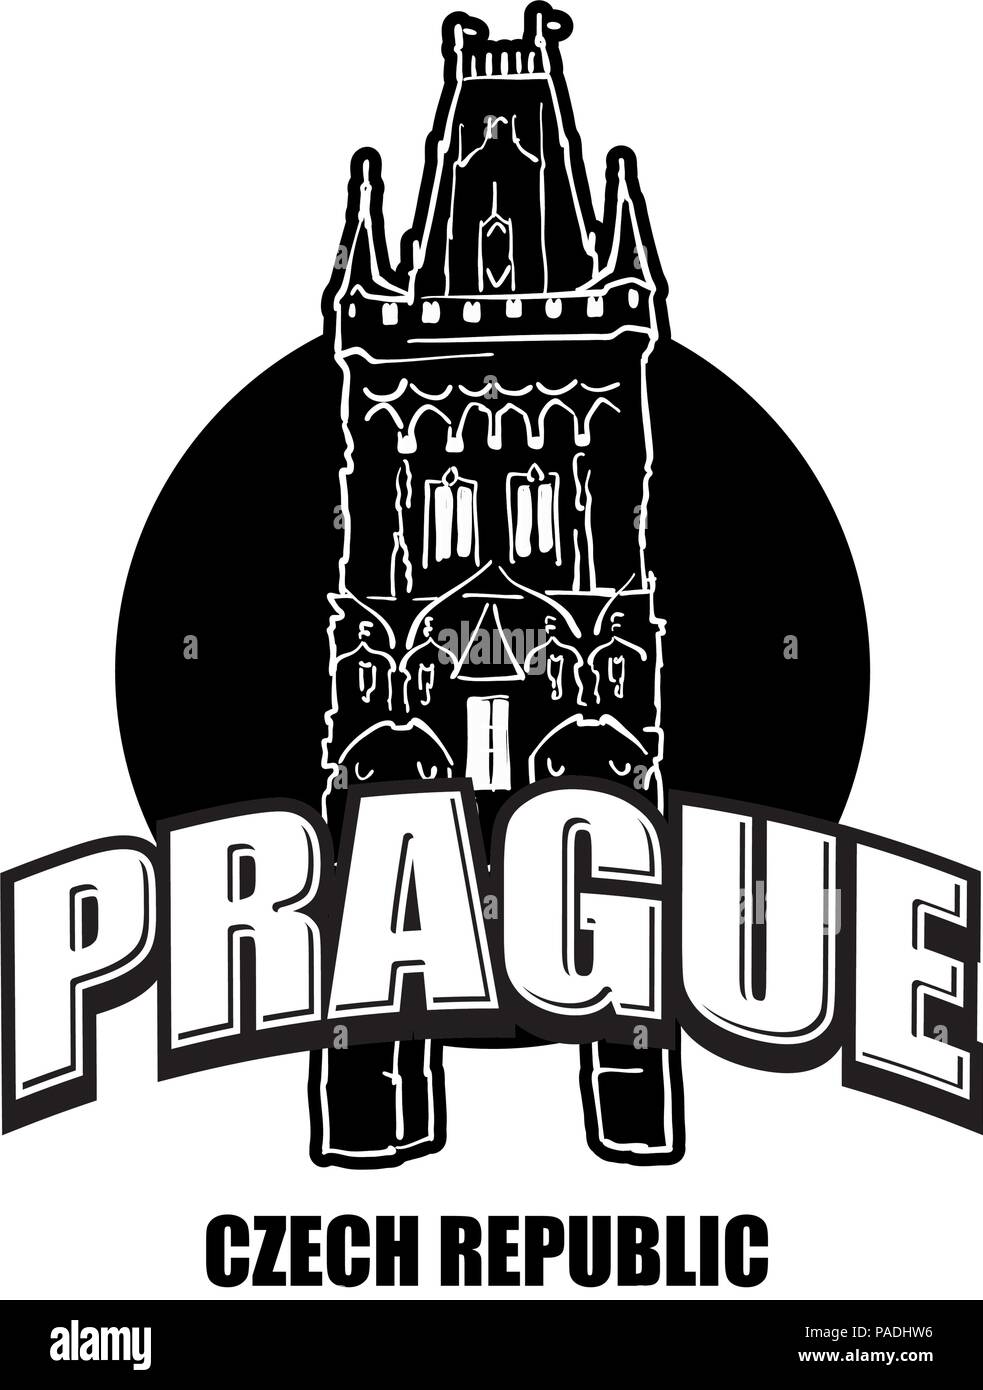 Prague, Czech Republic, black and white logo for high quality prints. Hand drawn vector sketch. Stock Vector